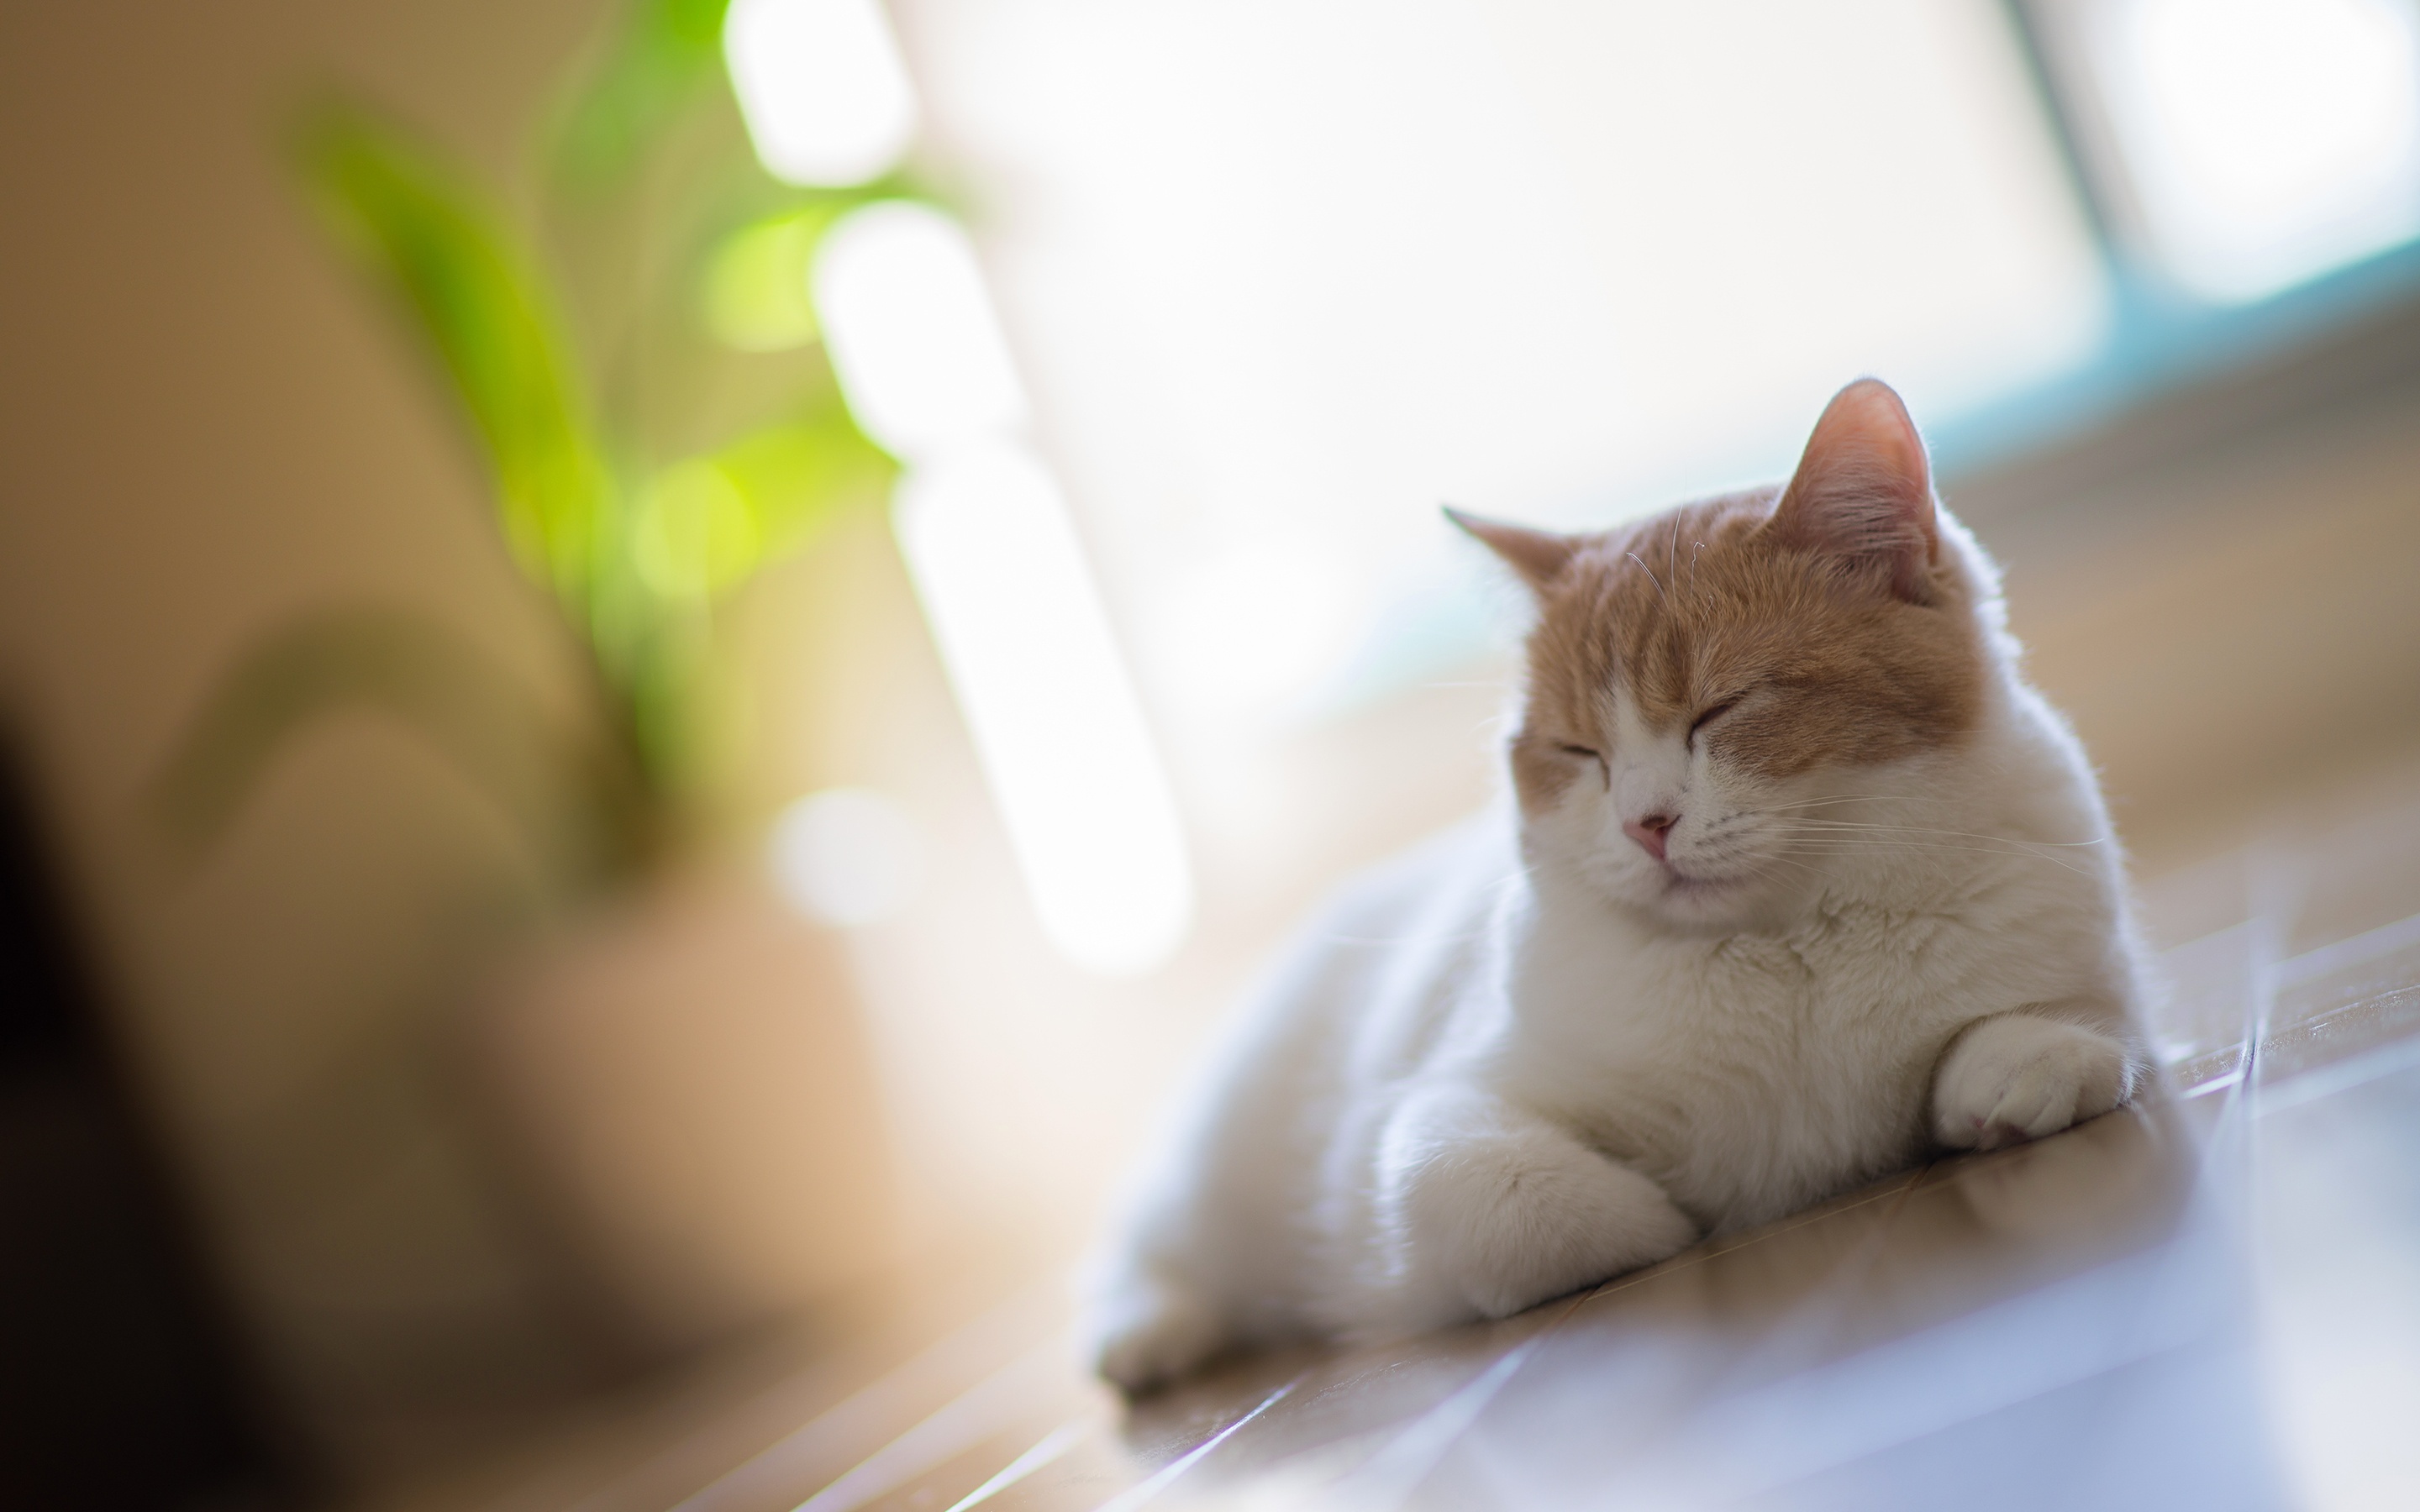 Cat Asleep On The Floor At Home Wallpaper And Image